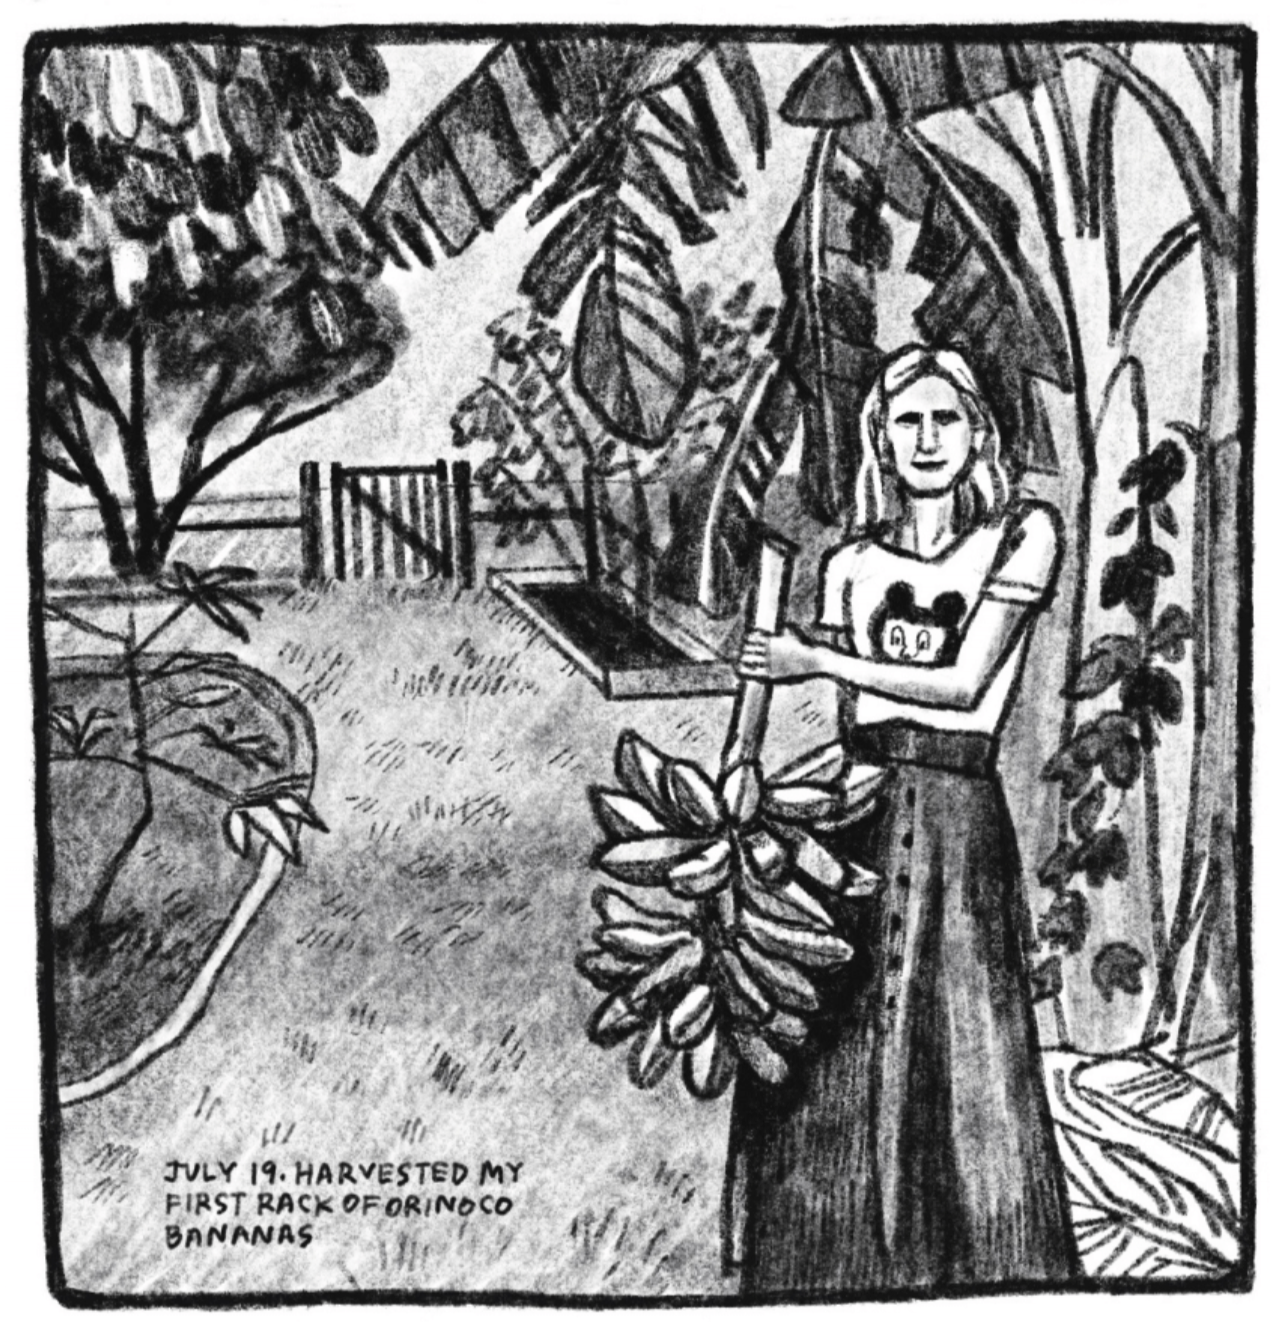 6. Kim stands in a back-yard garden, posing with a rack of bananas. She is framed by the leaves of her banana tree. There are other trees and plants in plots behind her. She is smiling softly and wearing a graphic tee and a maxi skirt. â€œJuly 19. Harvested my first rack of orinoco bananas.â€